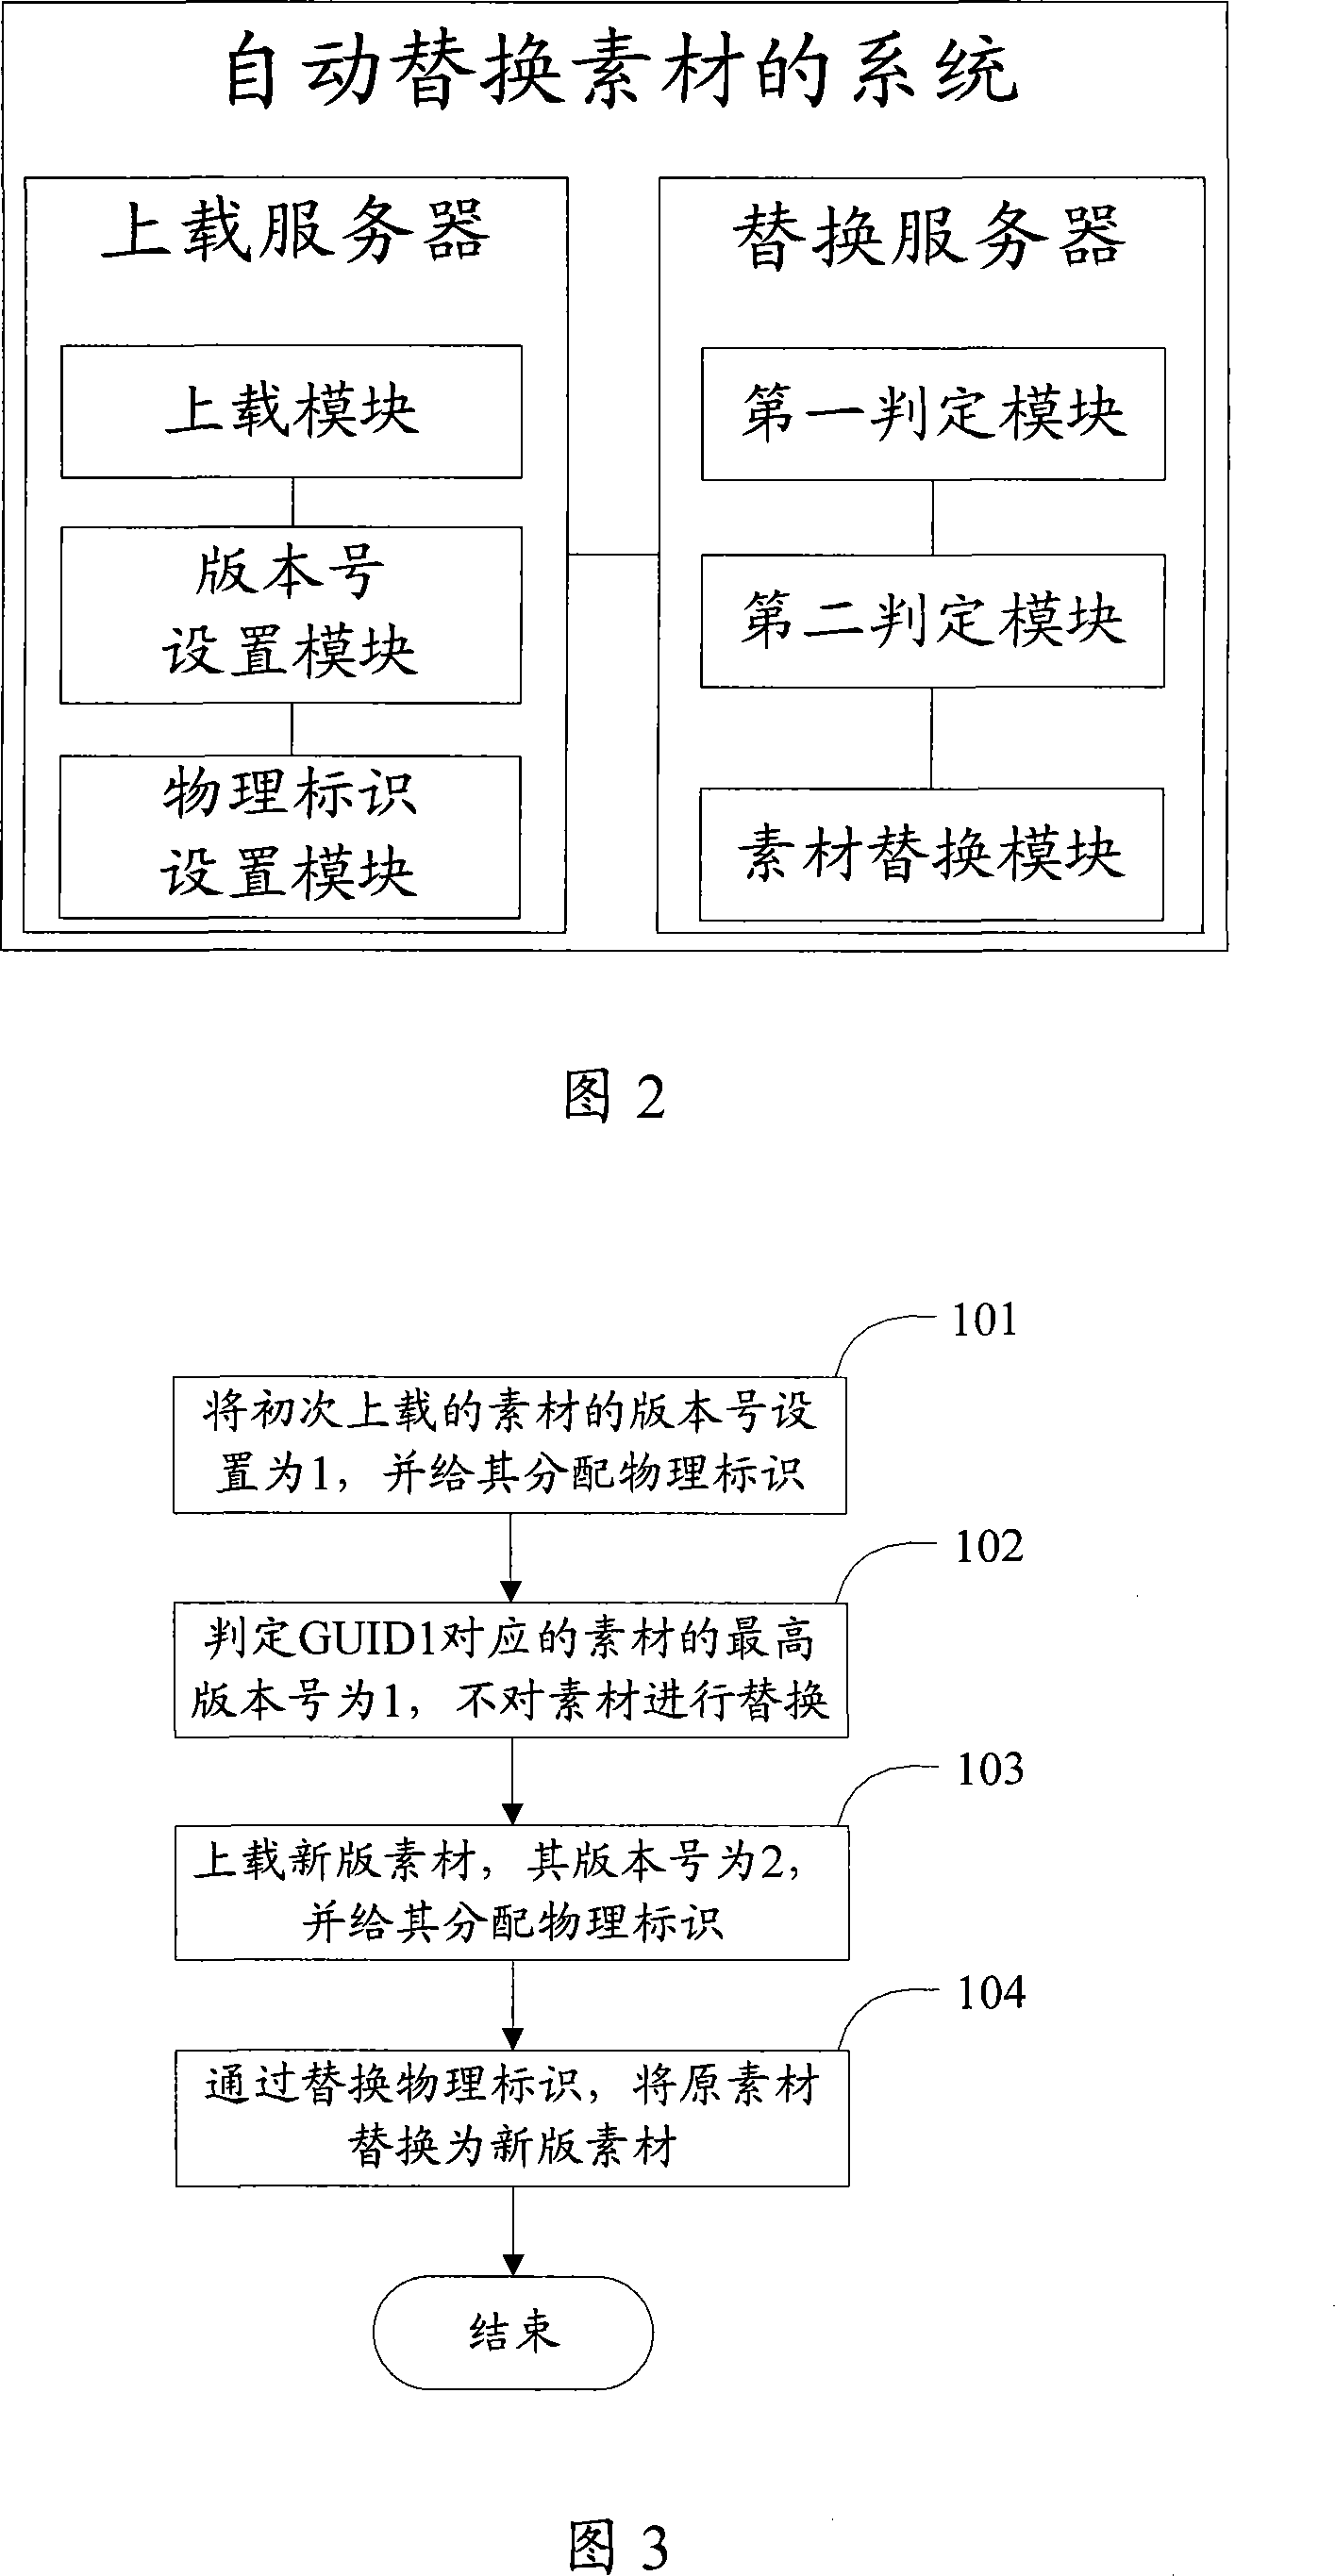 Method and system for automatically replacing materials